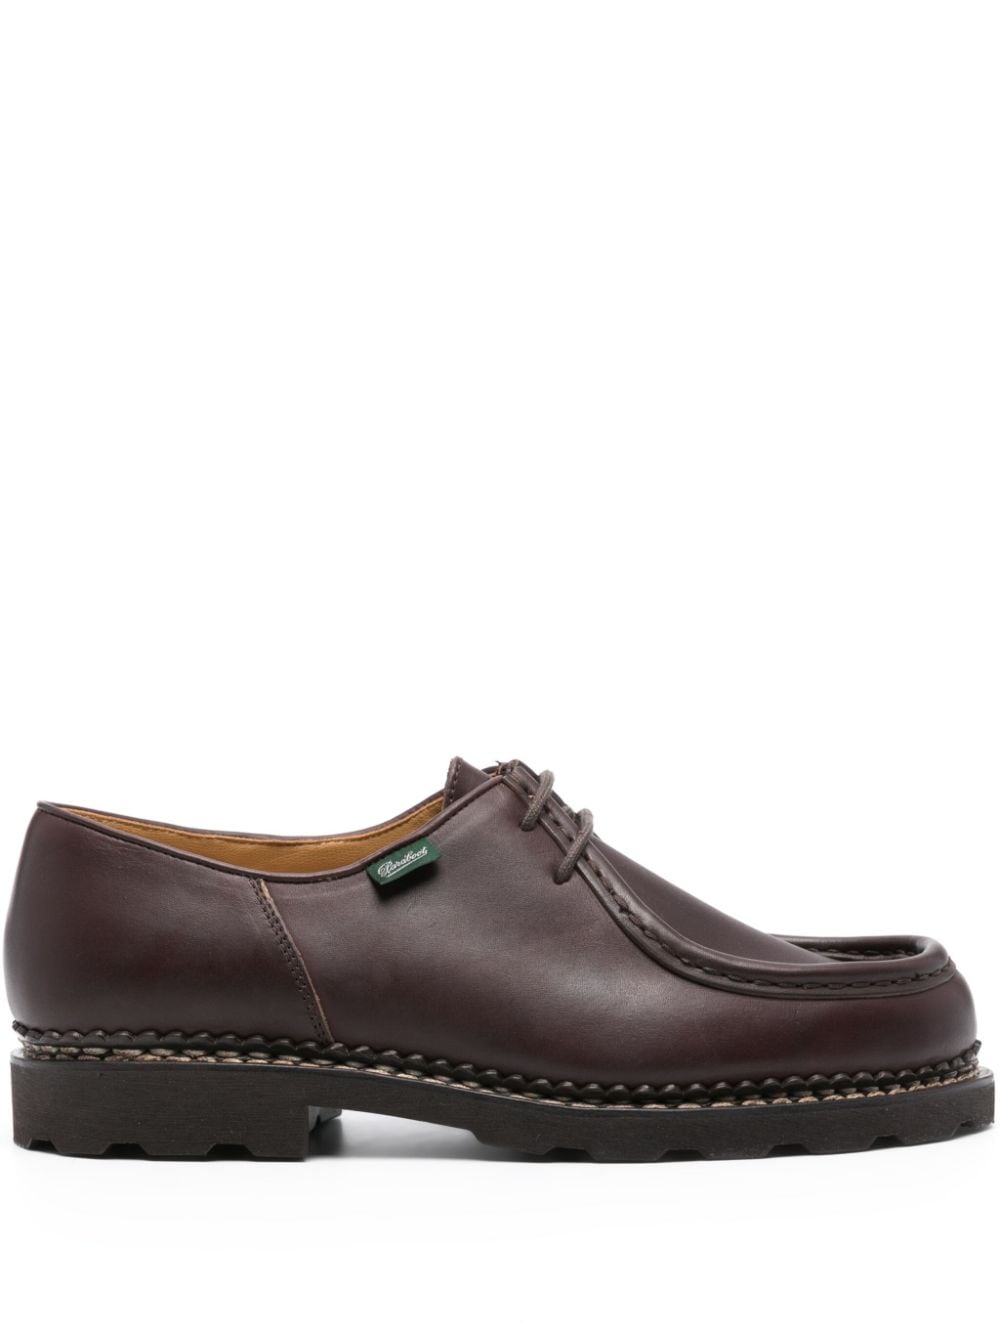 Paraboot Michael leather lace-up shoes - Brown von Paraboot